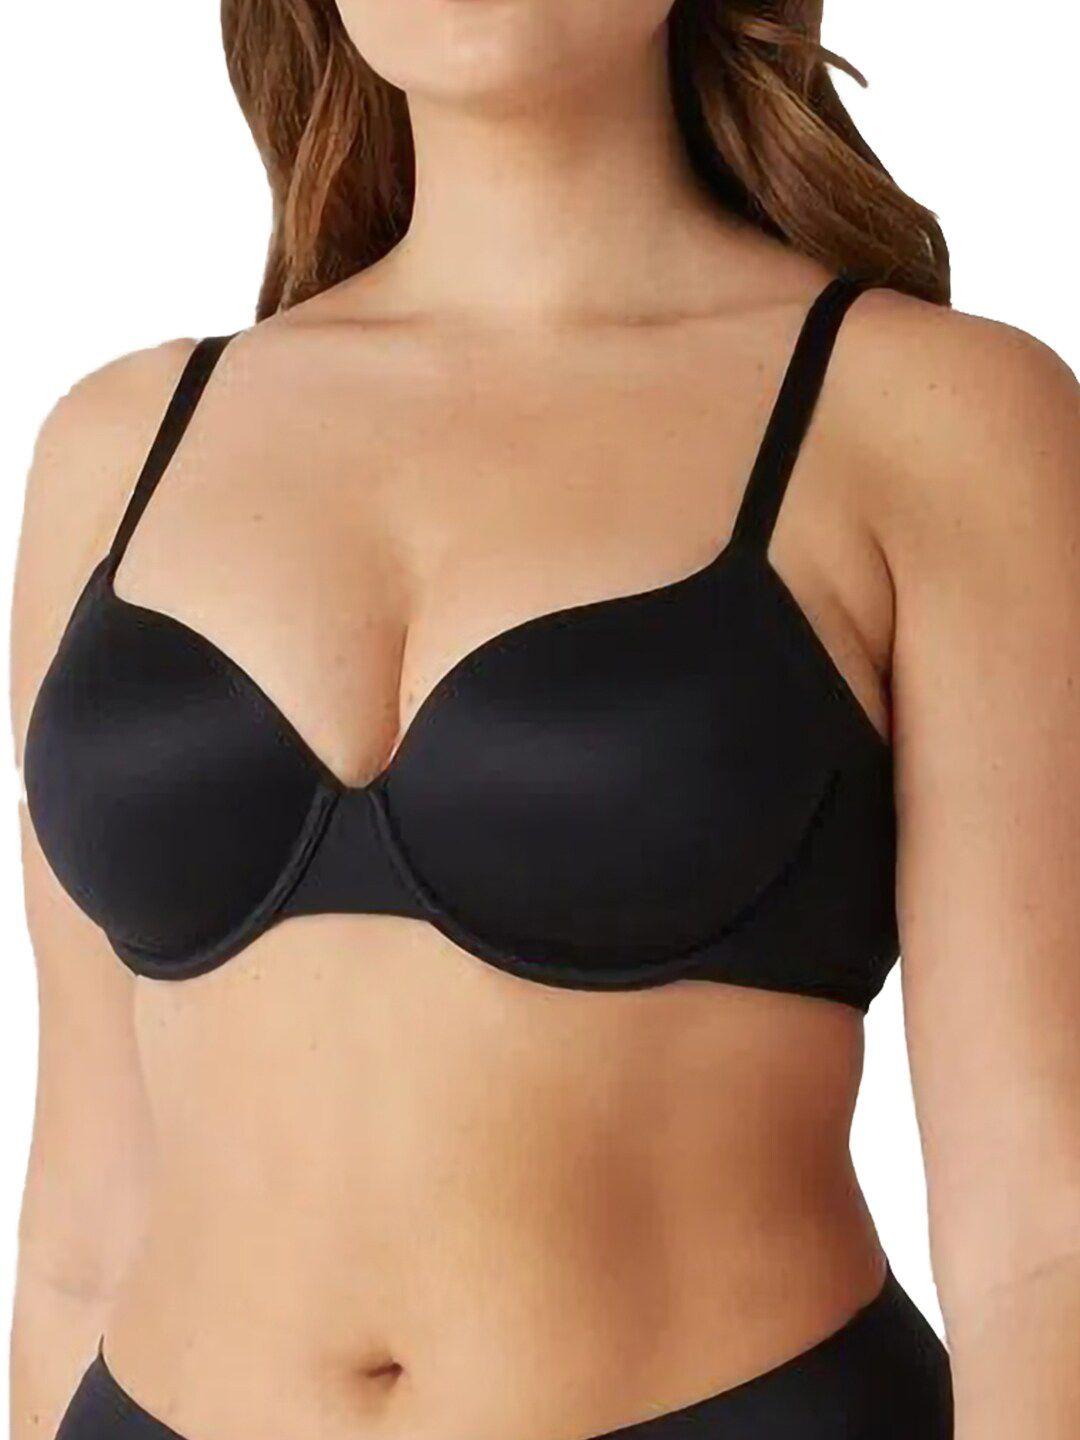 yamamay-underwired-non-padded-full-coverage-360-degree-support-seamless-balconette-bra